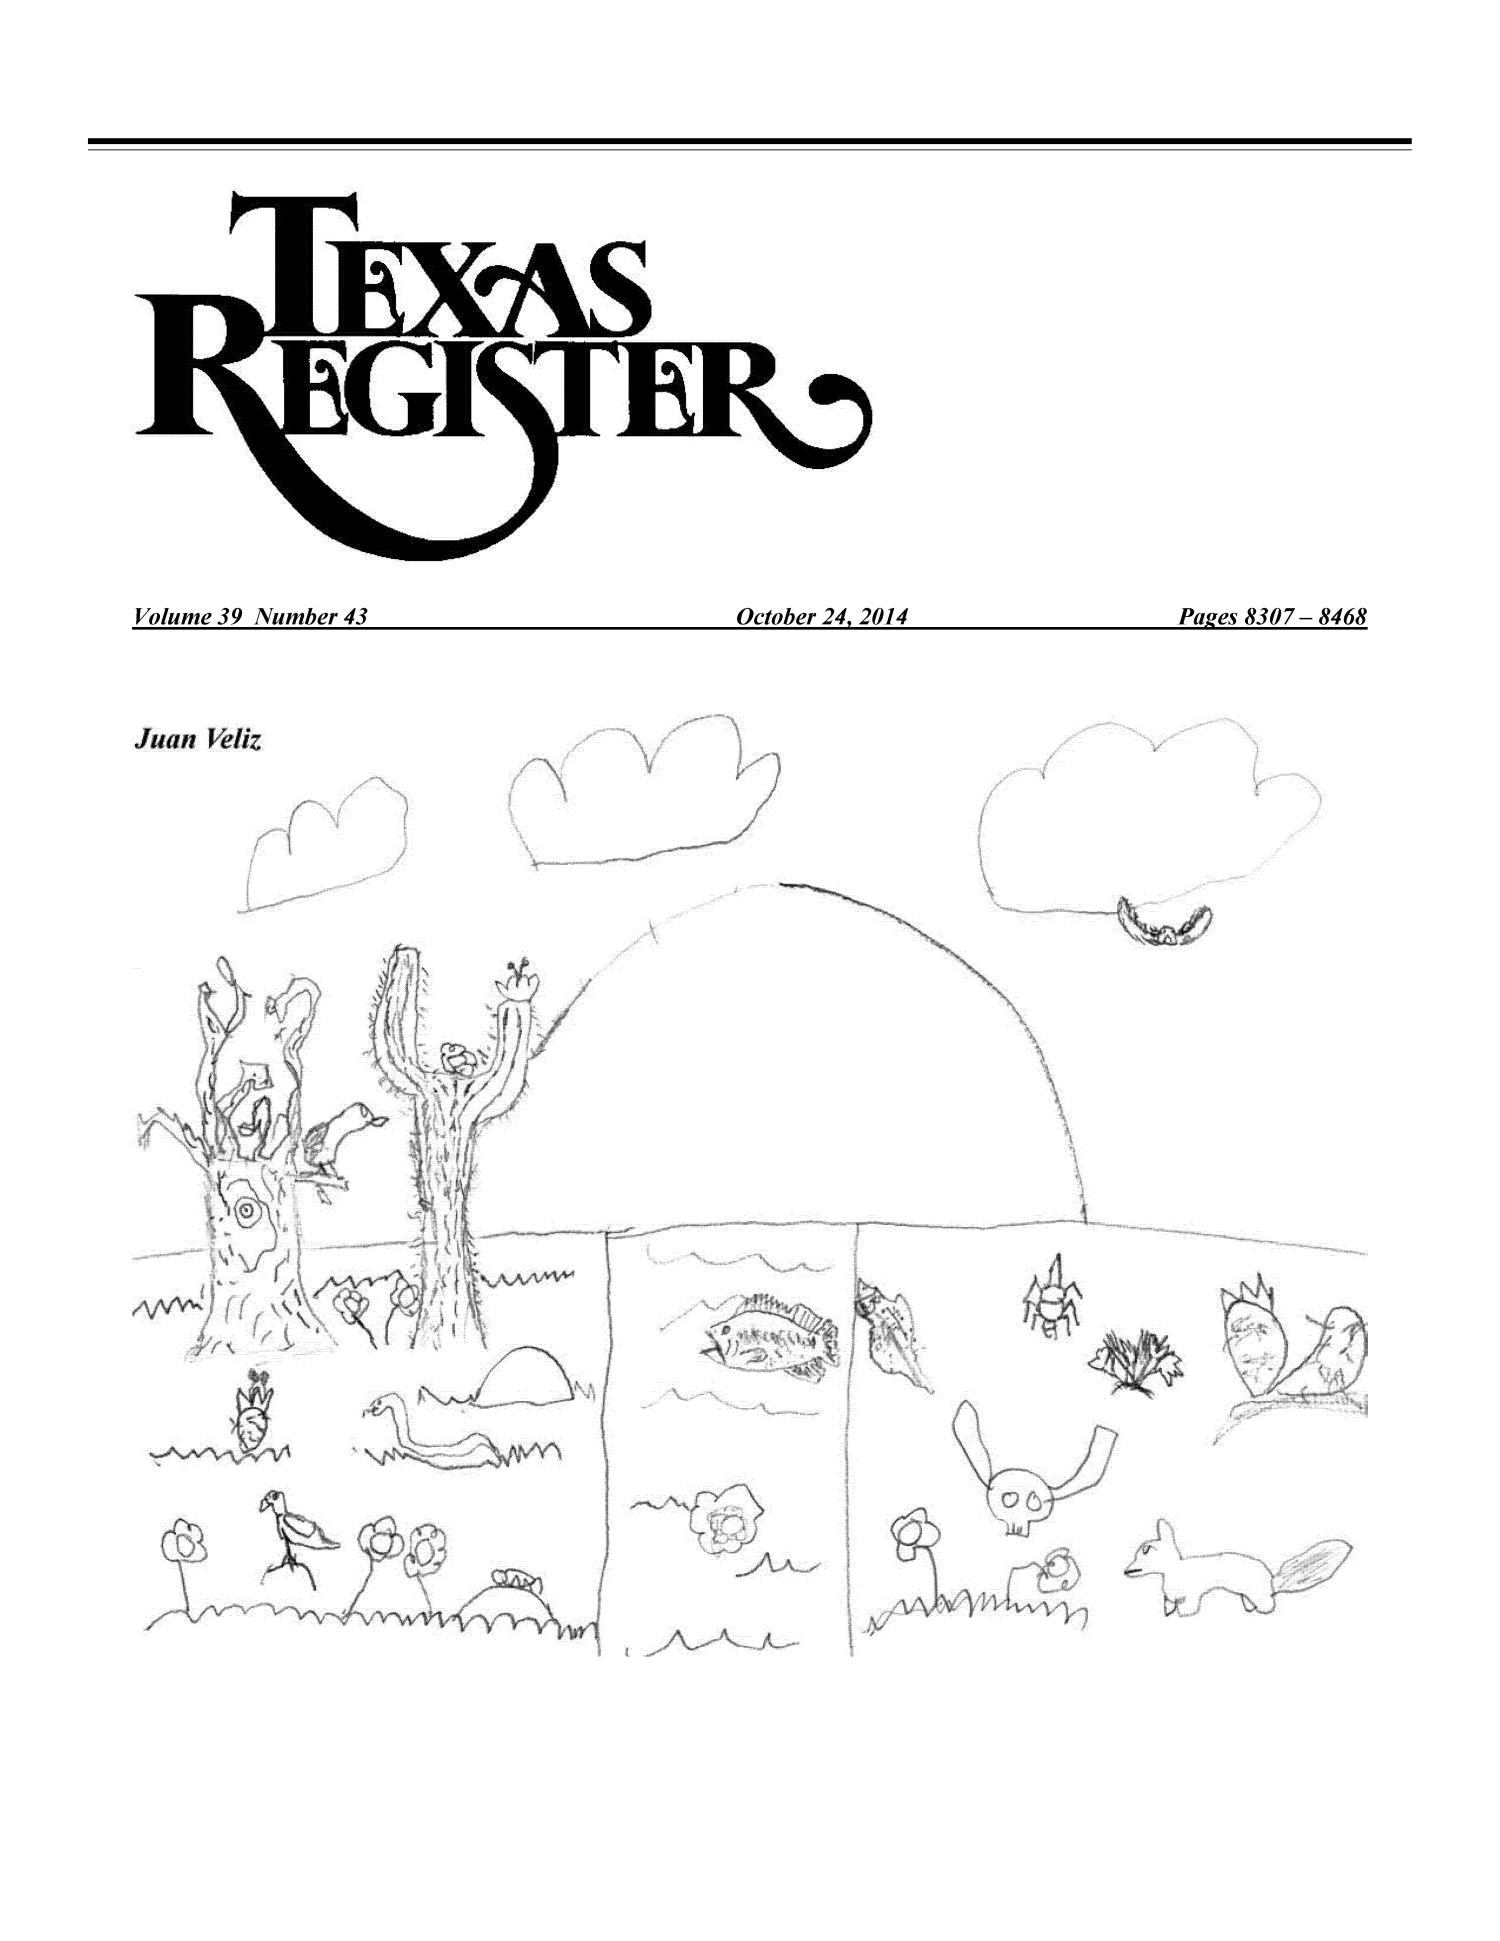 Texas Register, Volume 39, Number 43, Pages 8307-8468, October 24, 2014
                                                
                                                    Title Page
                                                